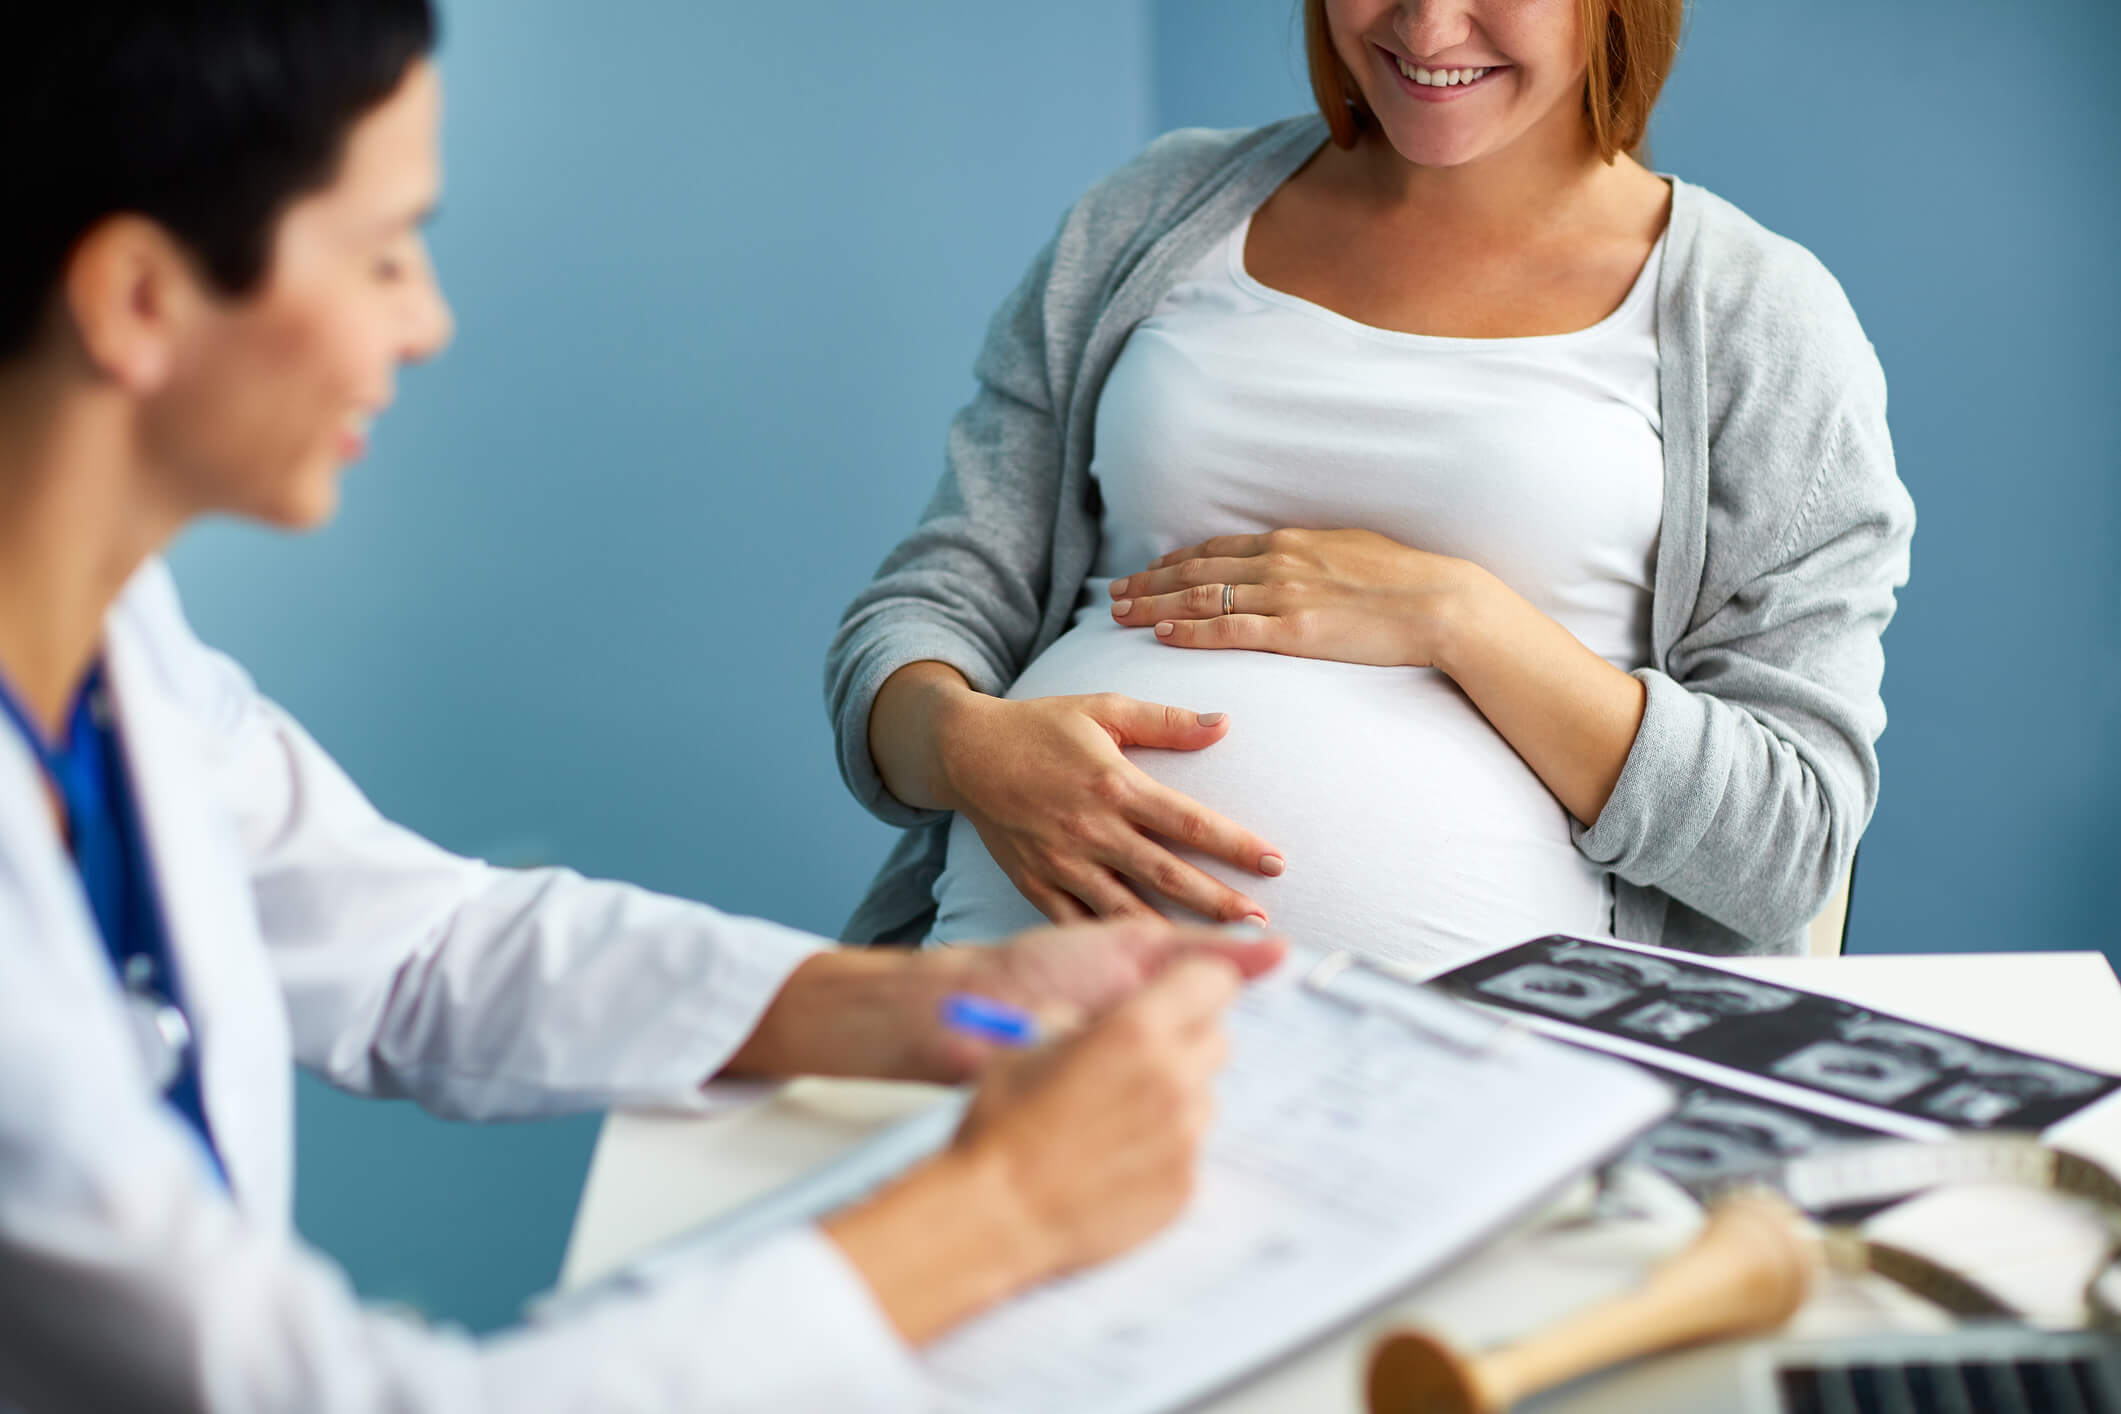 How surrogacy takes place